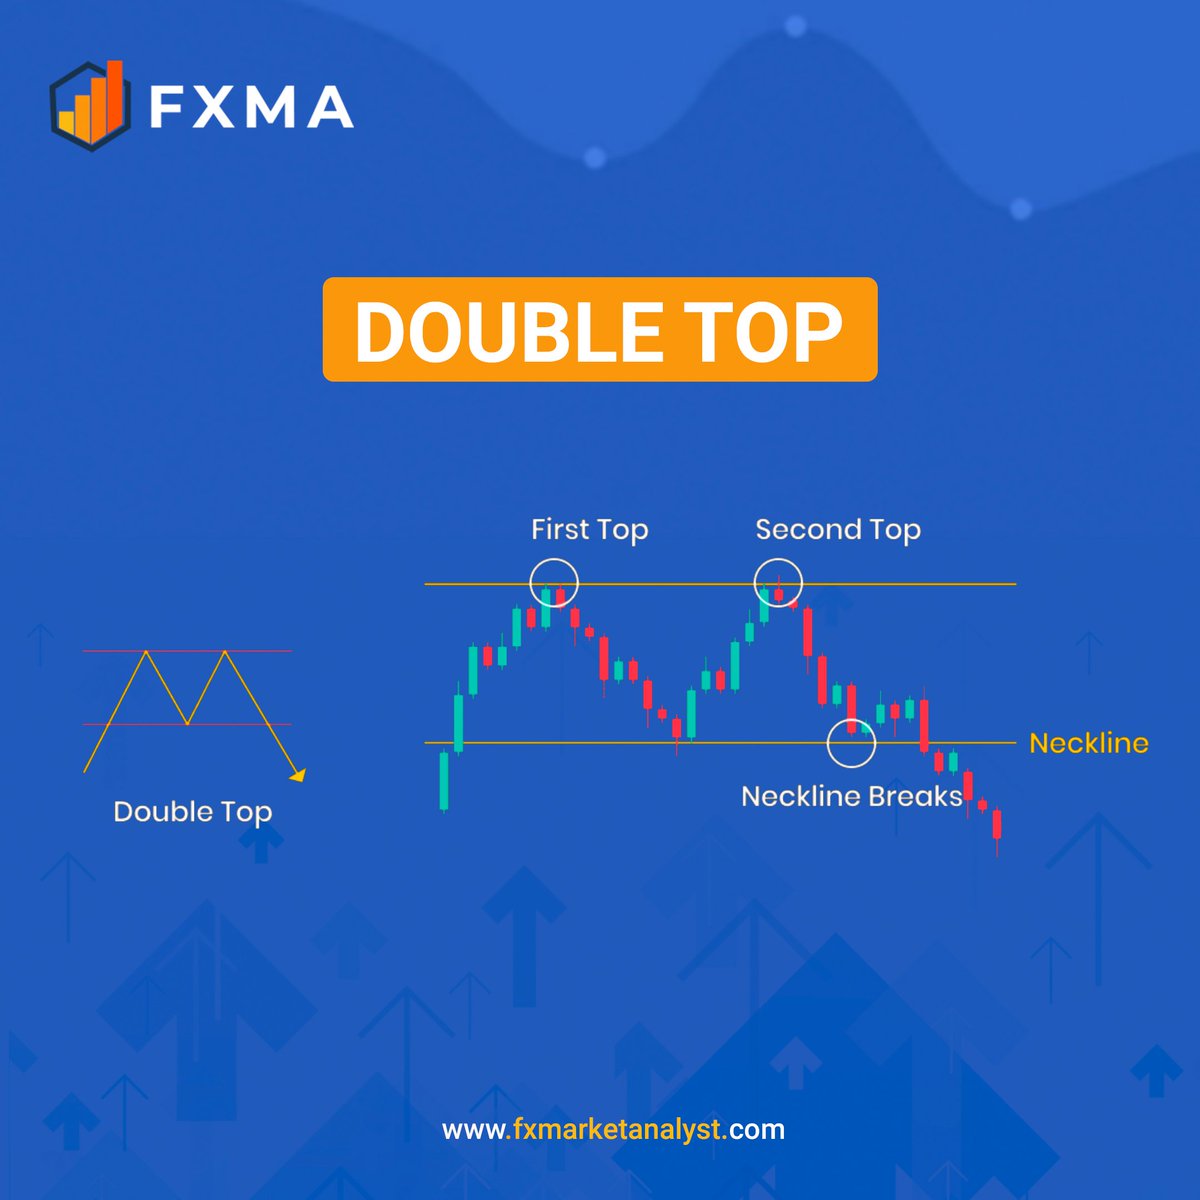 Spotting the Doppelganger Peaks! 📉 Beware the double top pattern lurking in the charts, signaling a potential trend reversal. Like a mirror image of market sentiment, this formation warns traders to tread cautiously. 🔍

#DoubleTop #TradingPatterns #MarketAlert